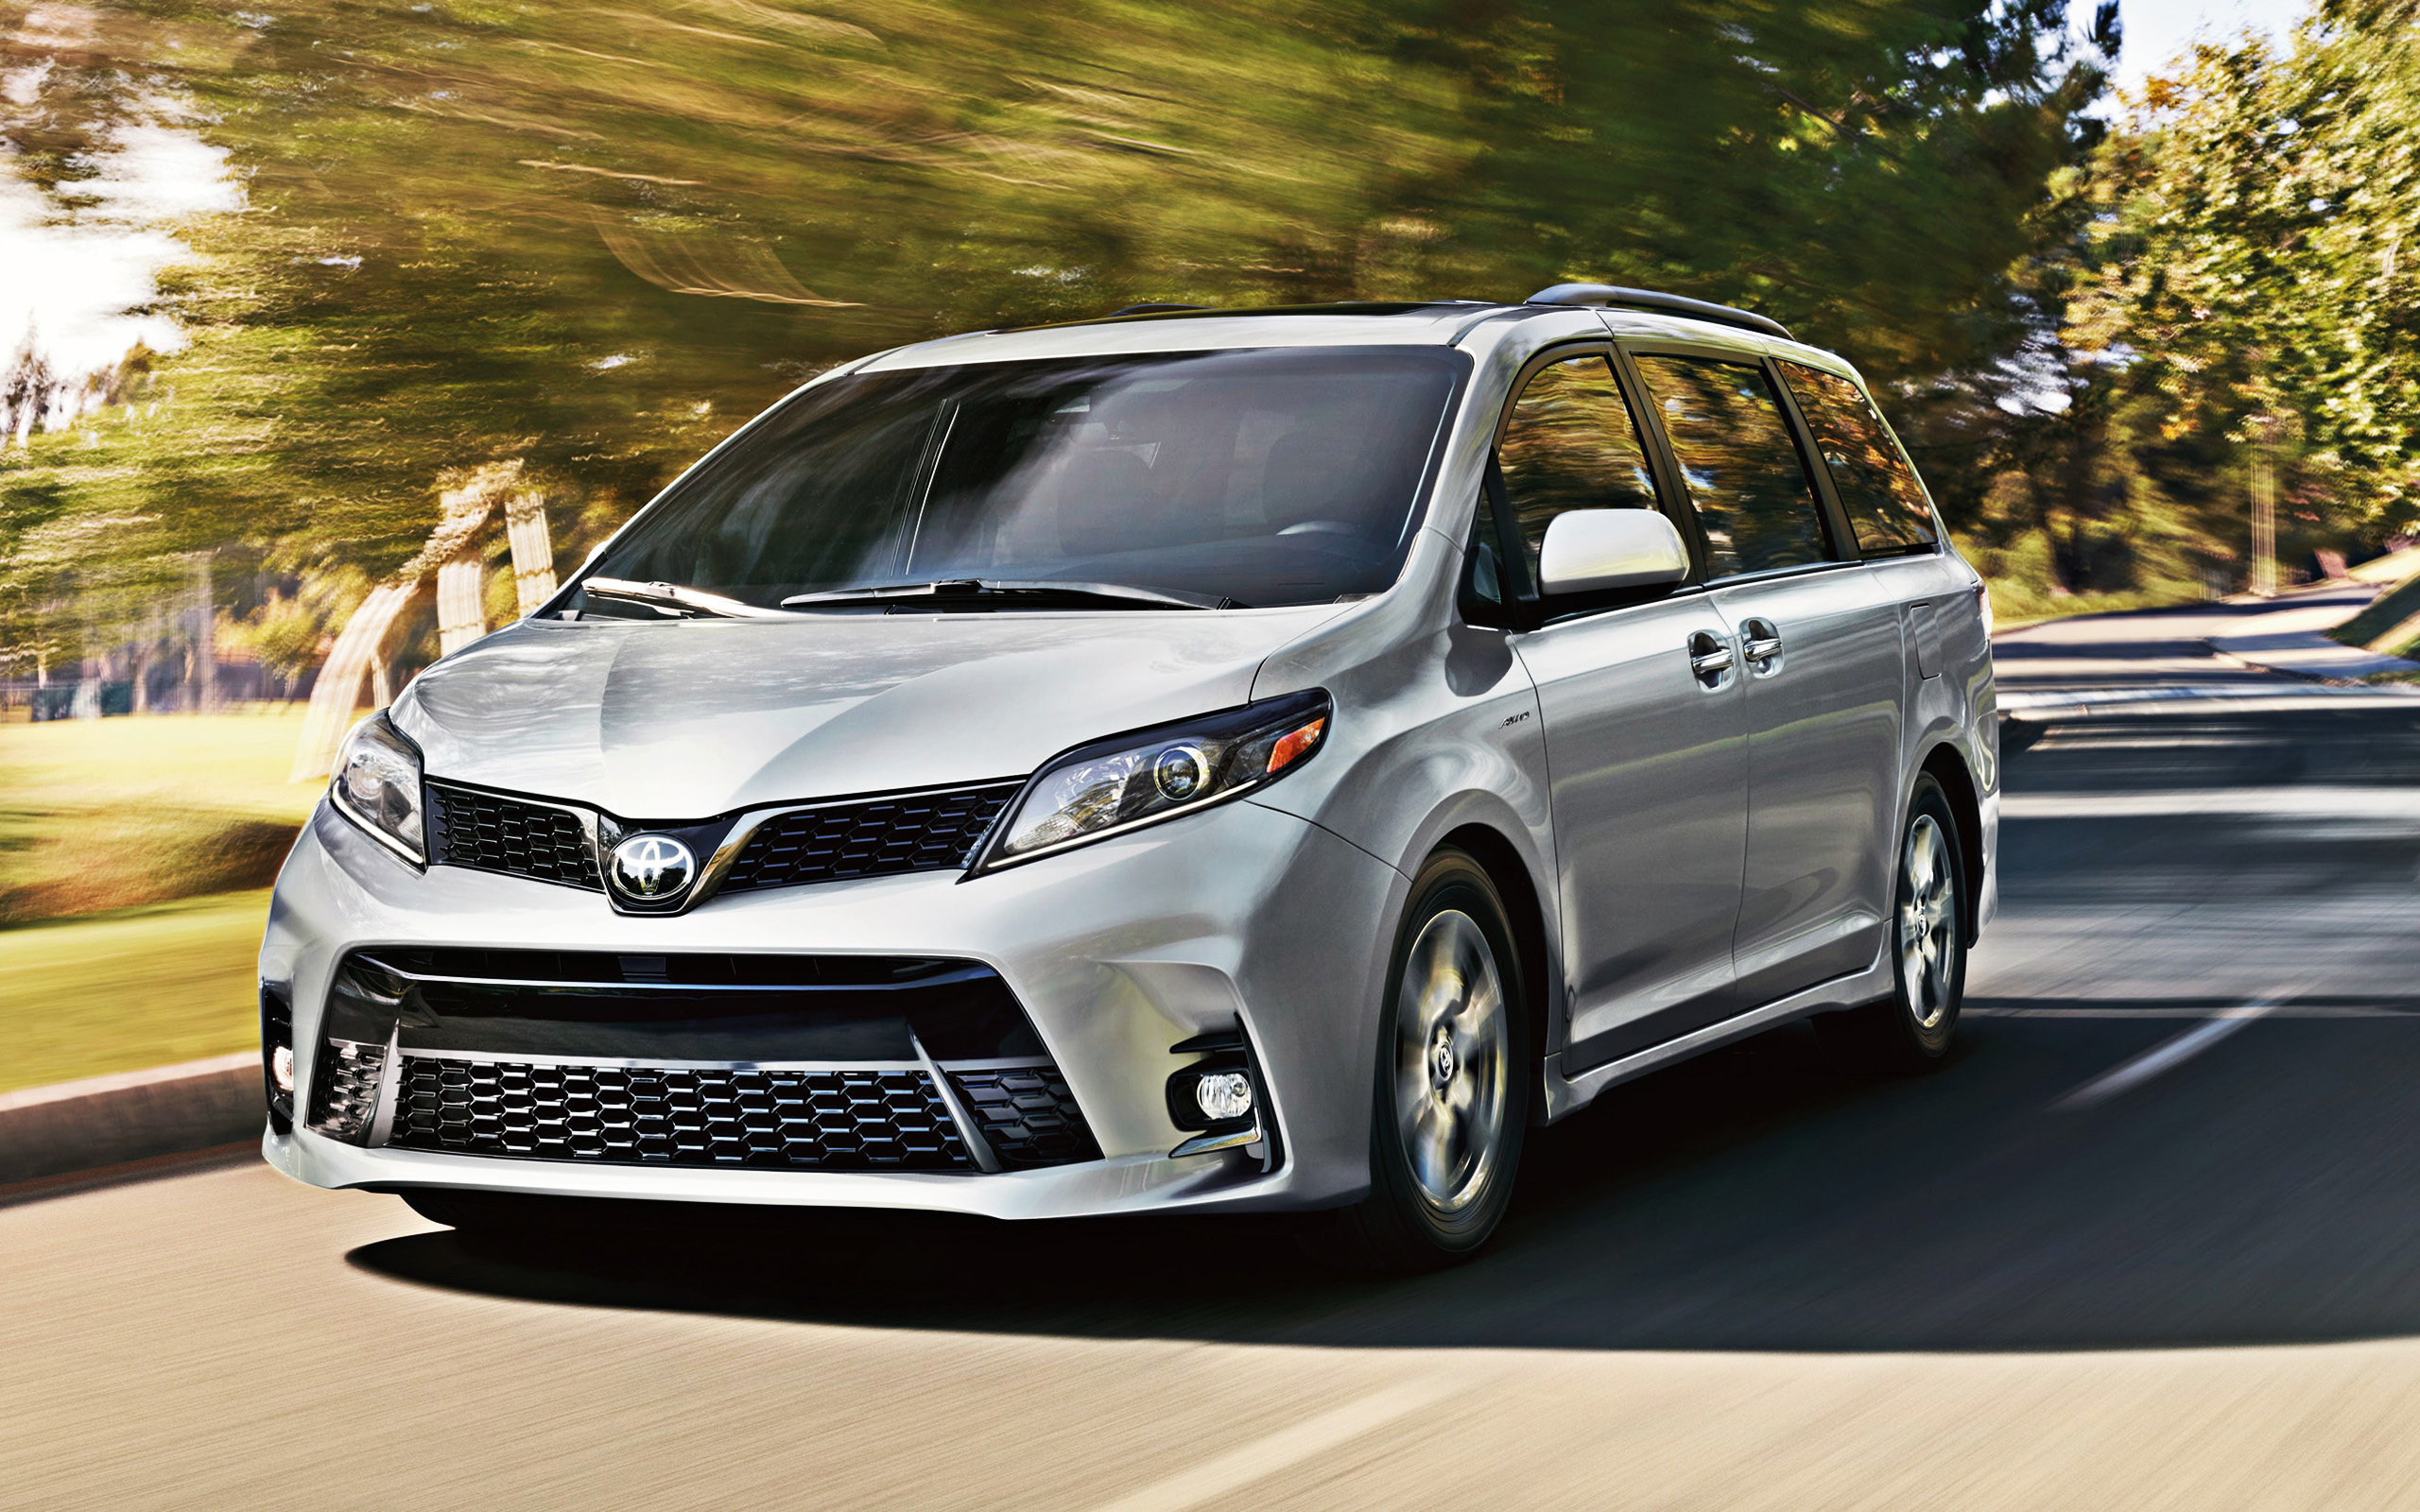 Toyota Sienna 2020, Gray exterior, Japanese cars, High-quality pictures, 2560x1600 HD Desktop